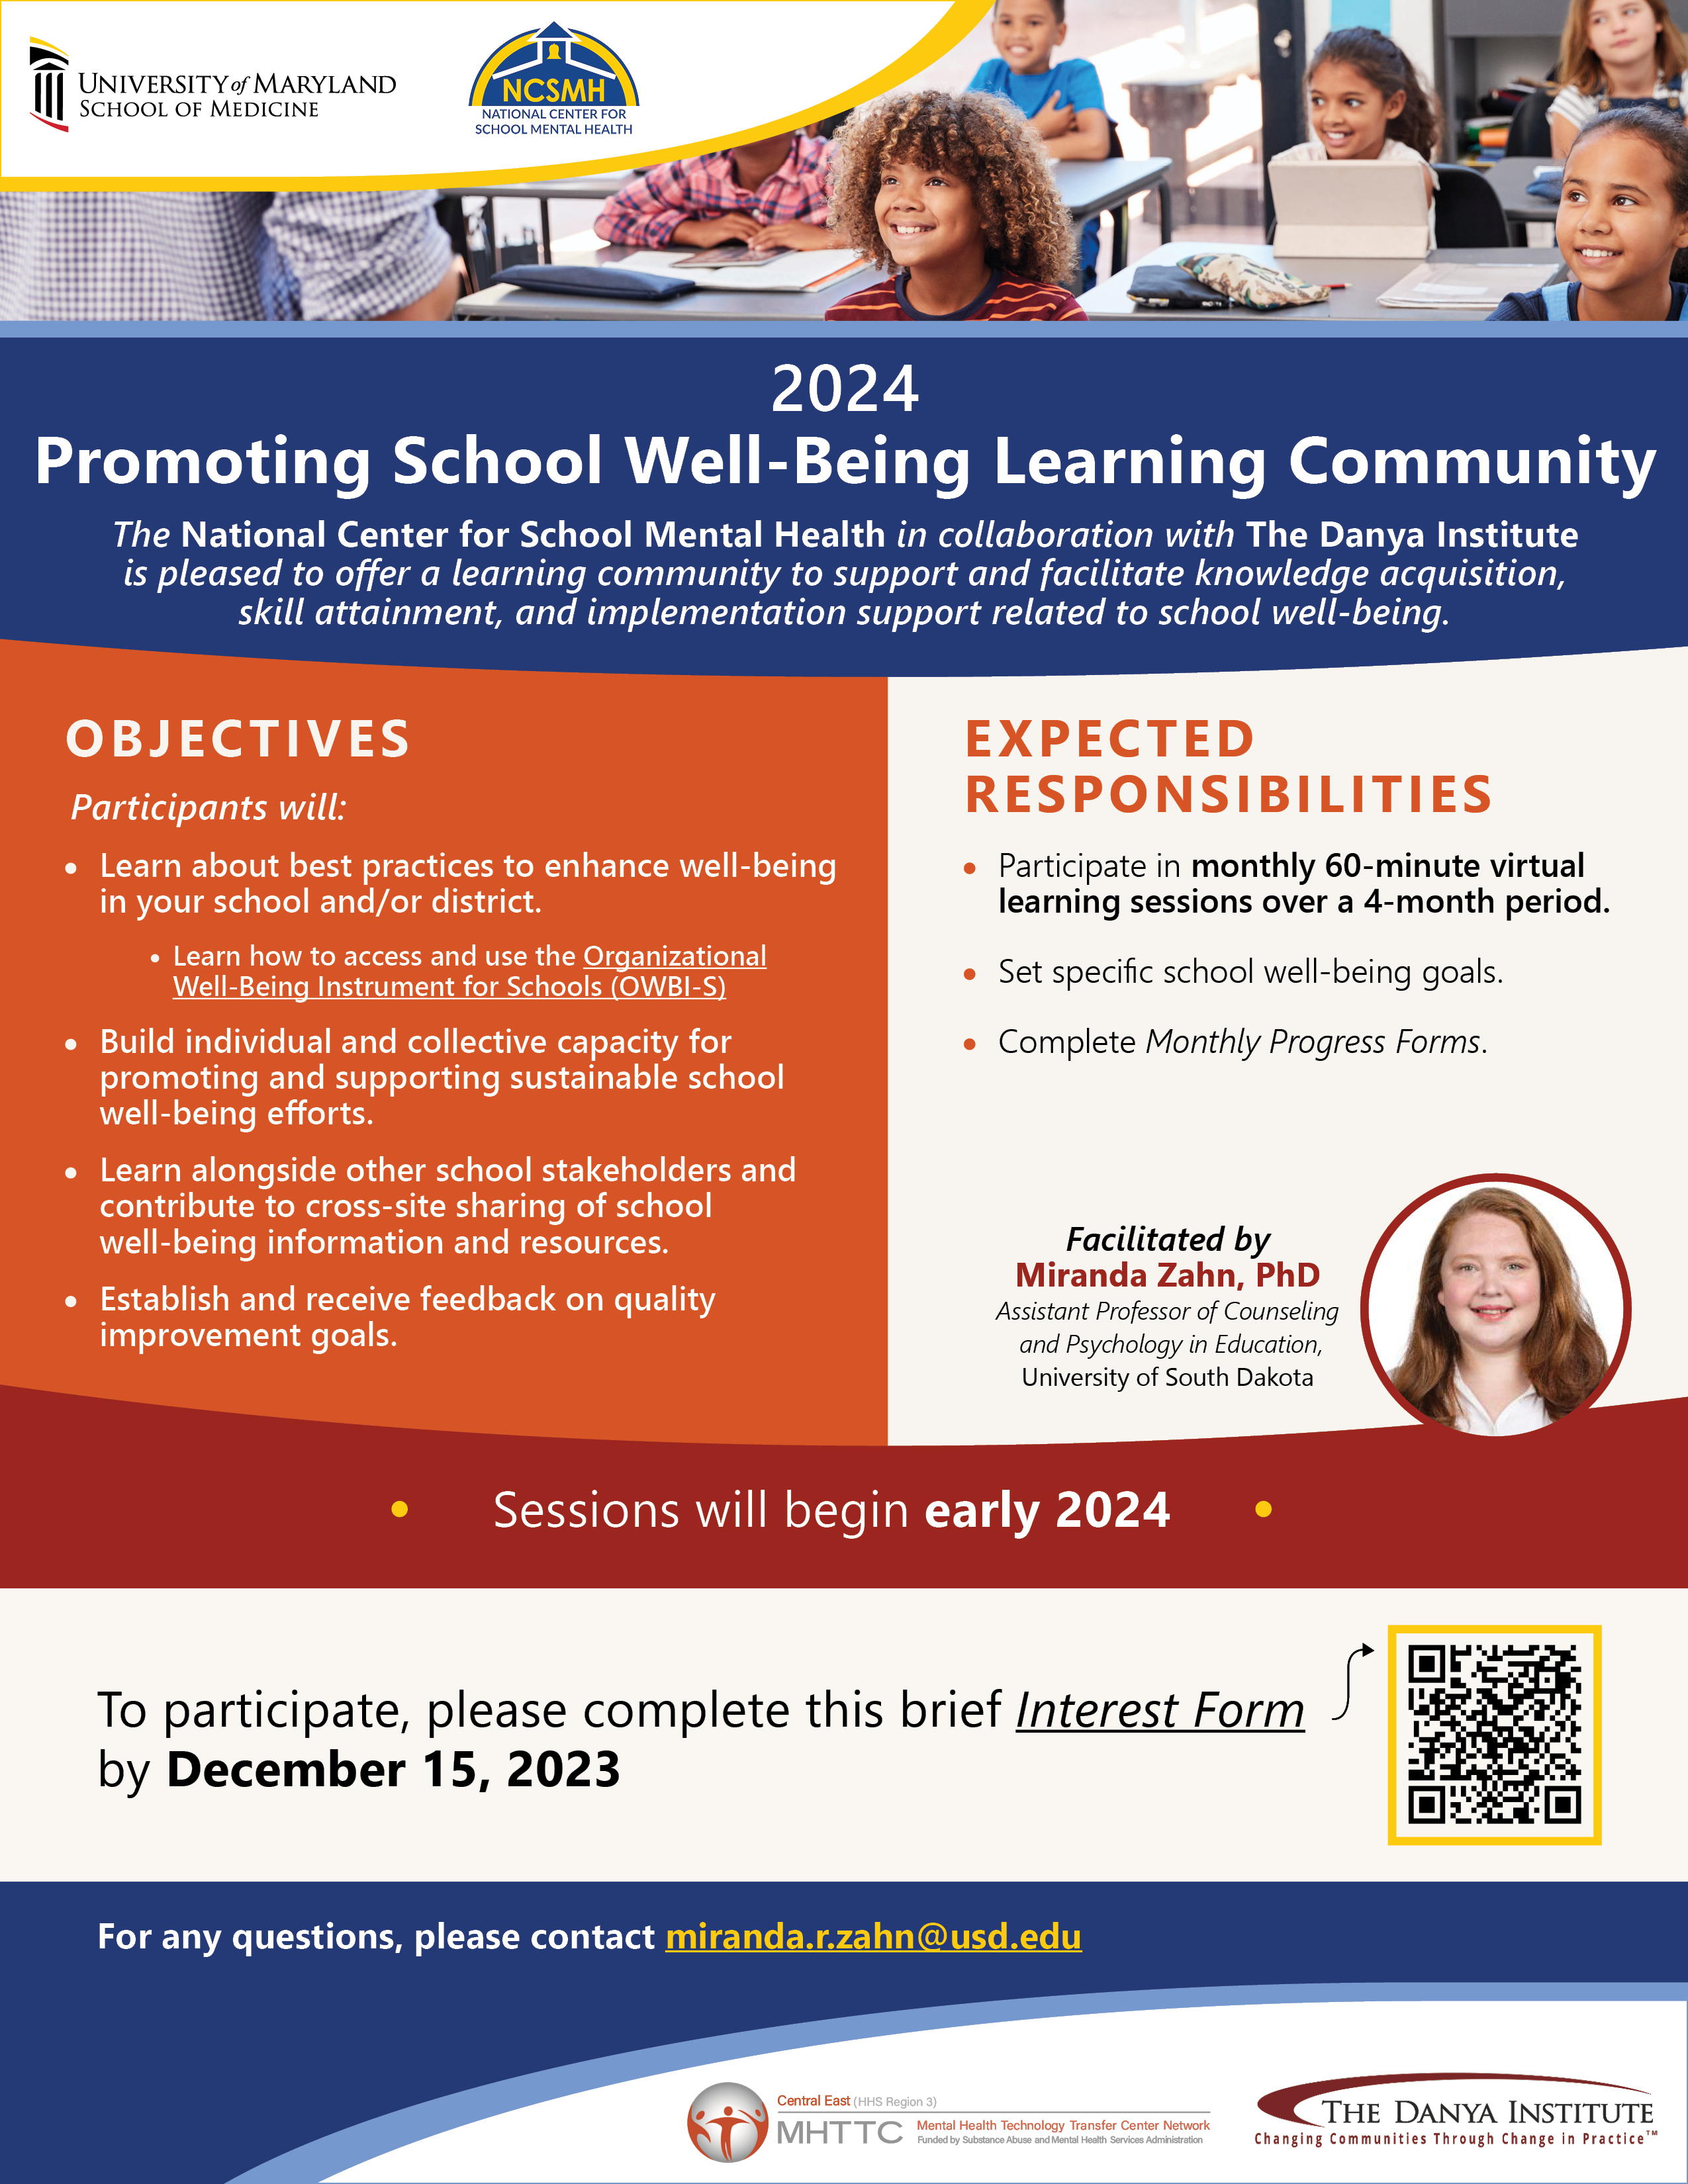 2024 Promoting School Well-Being Learning Community. Sessions will begin in early 2024. Please complete this brief interest form by December 15, 2023.